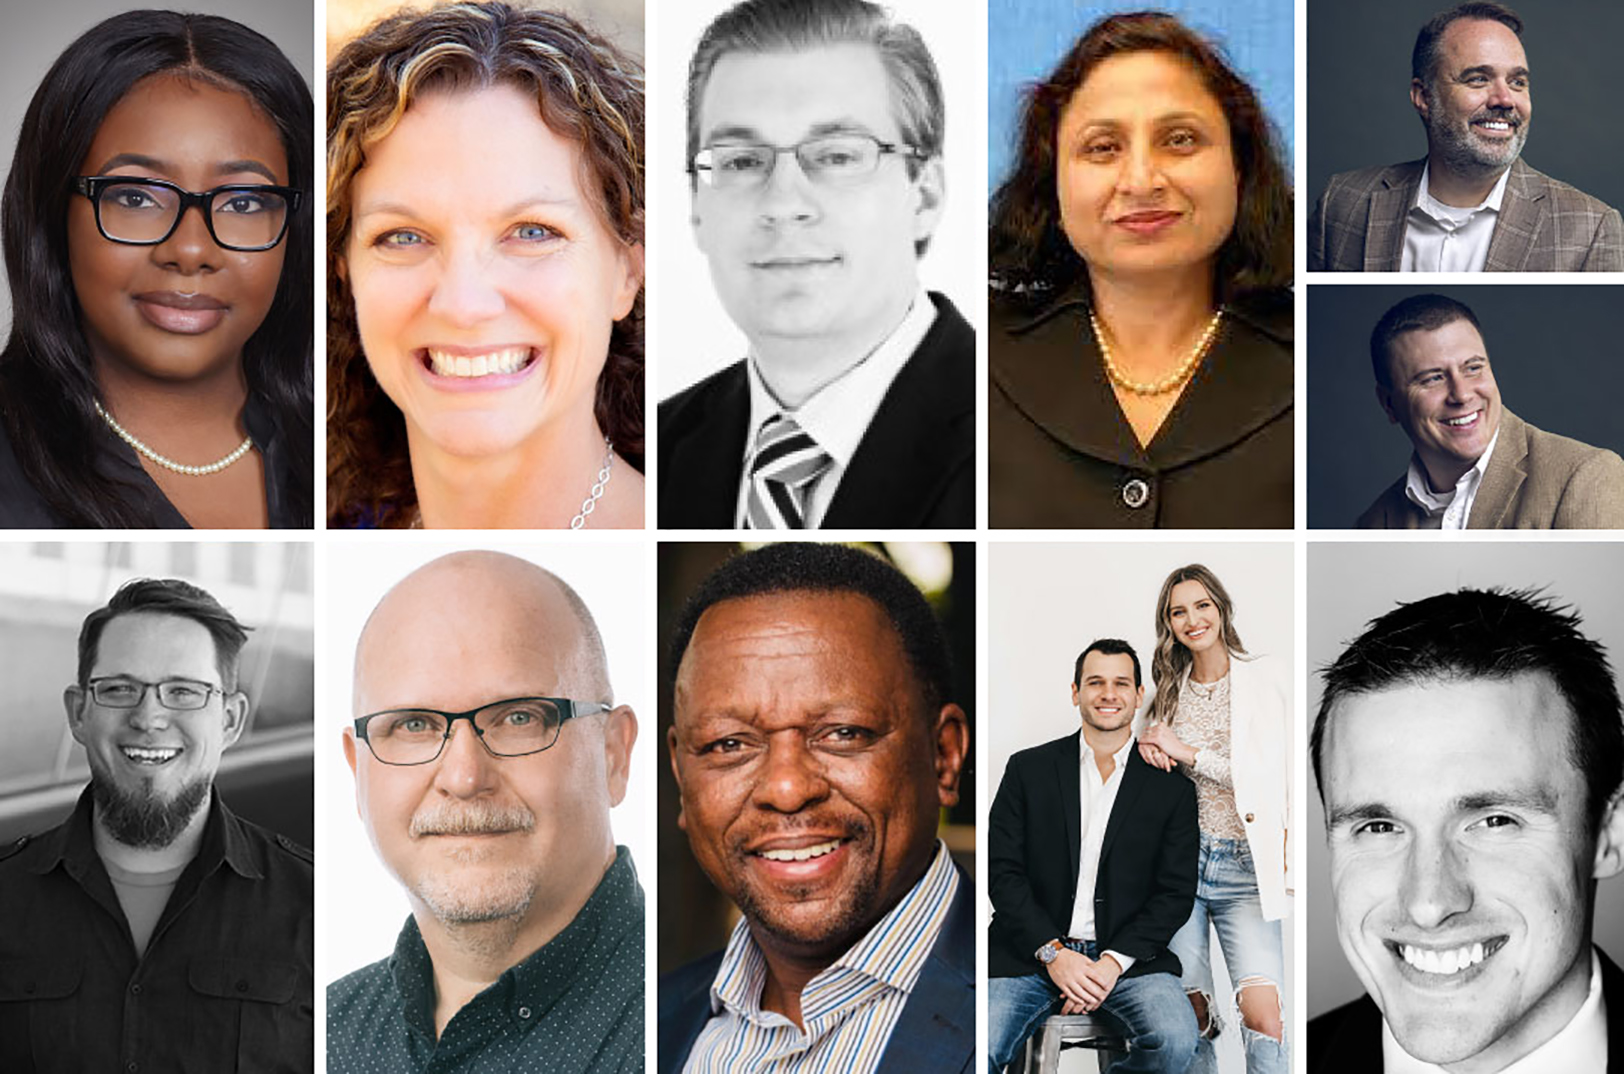 Comeback KC Ventures adds 9 more fellows to accelerate rapid-response health innovations